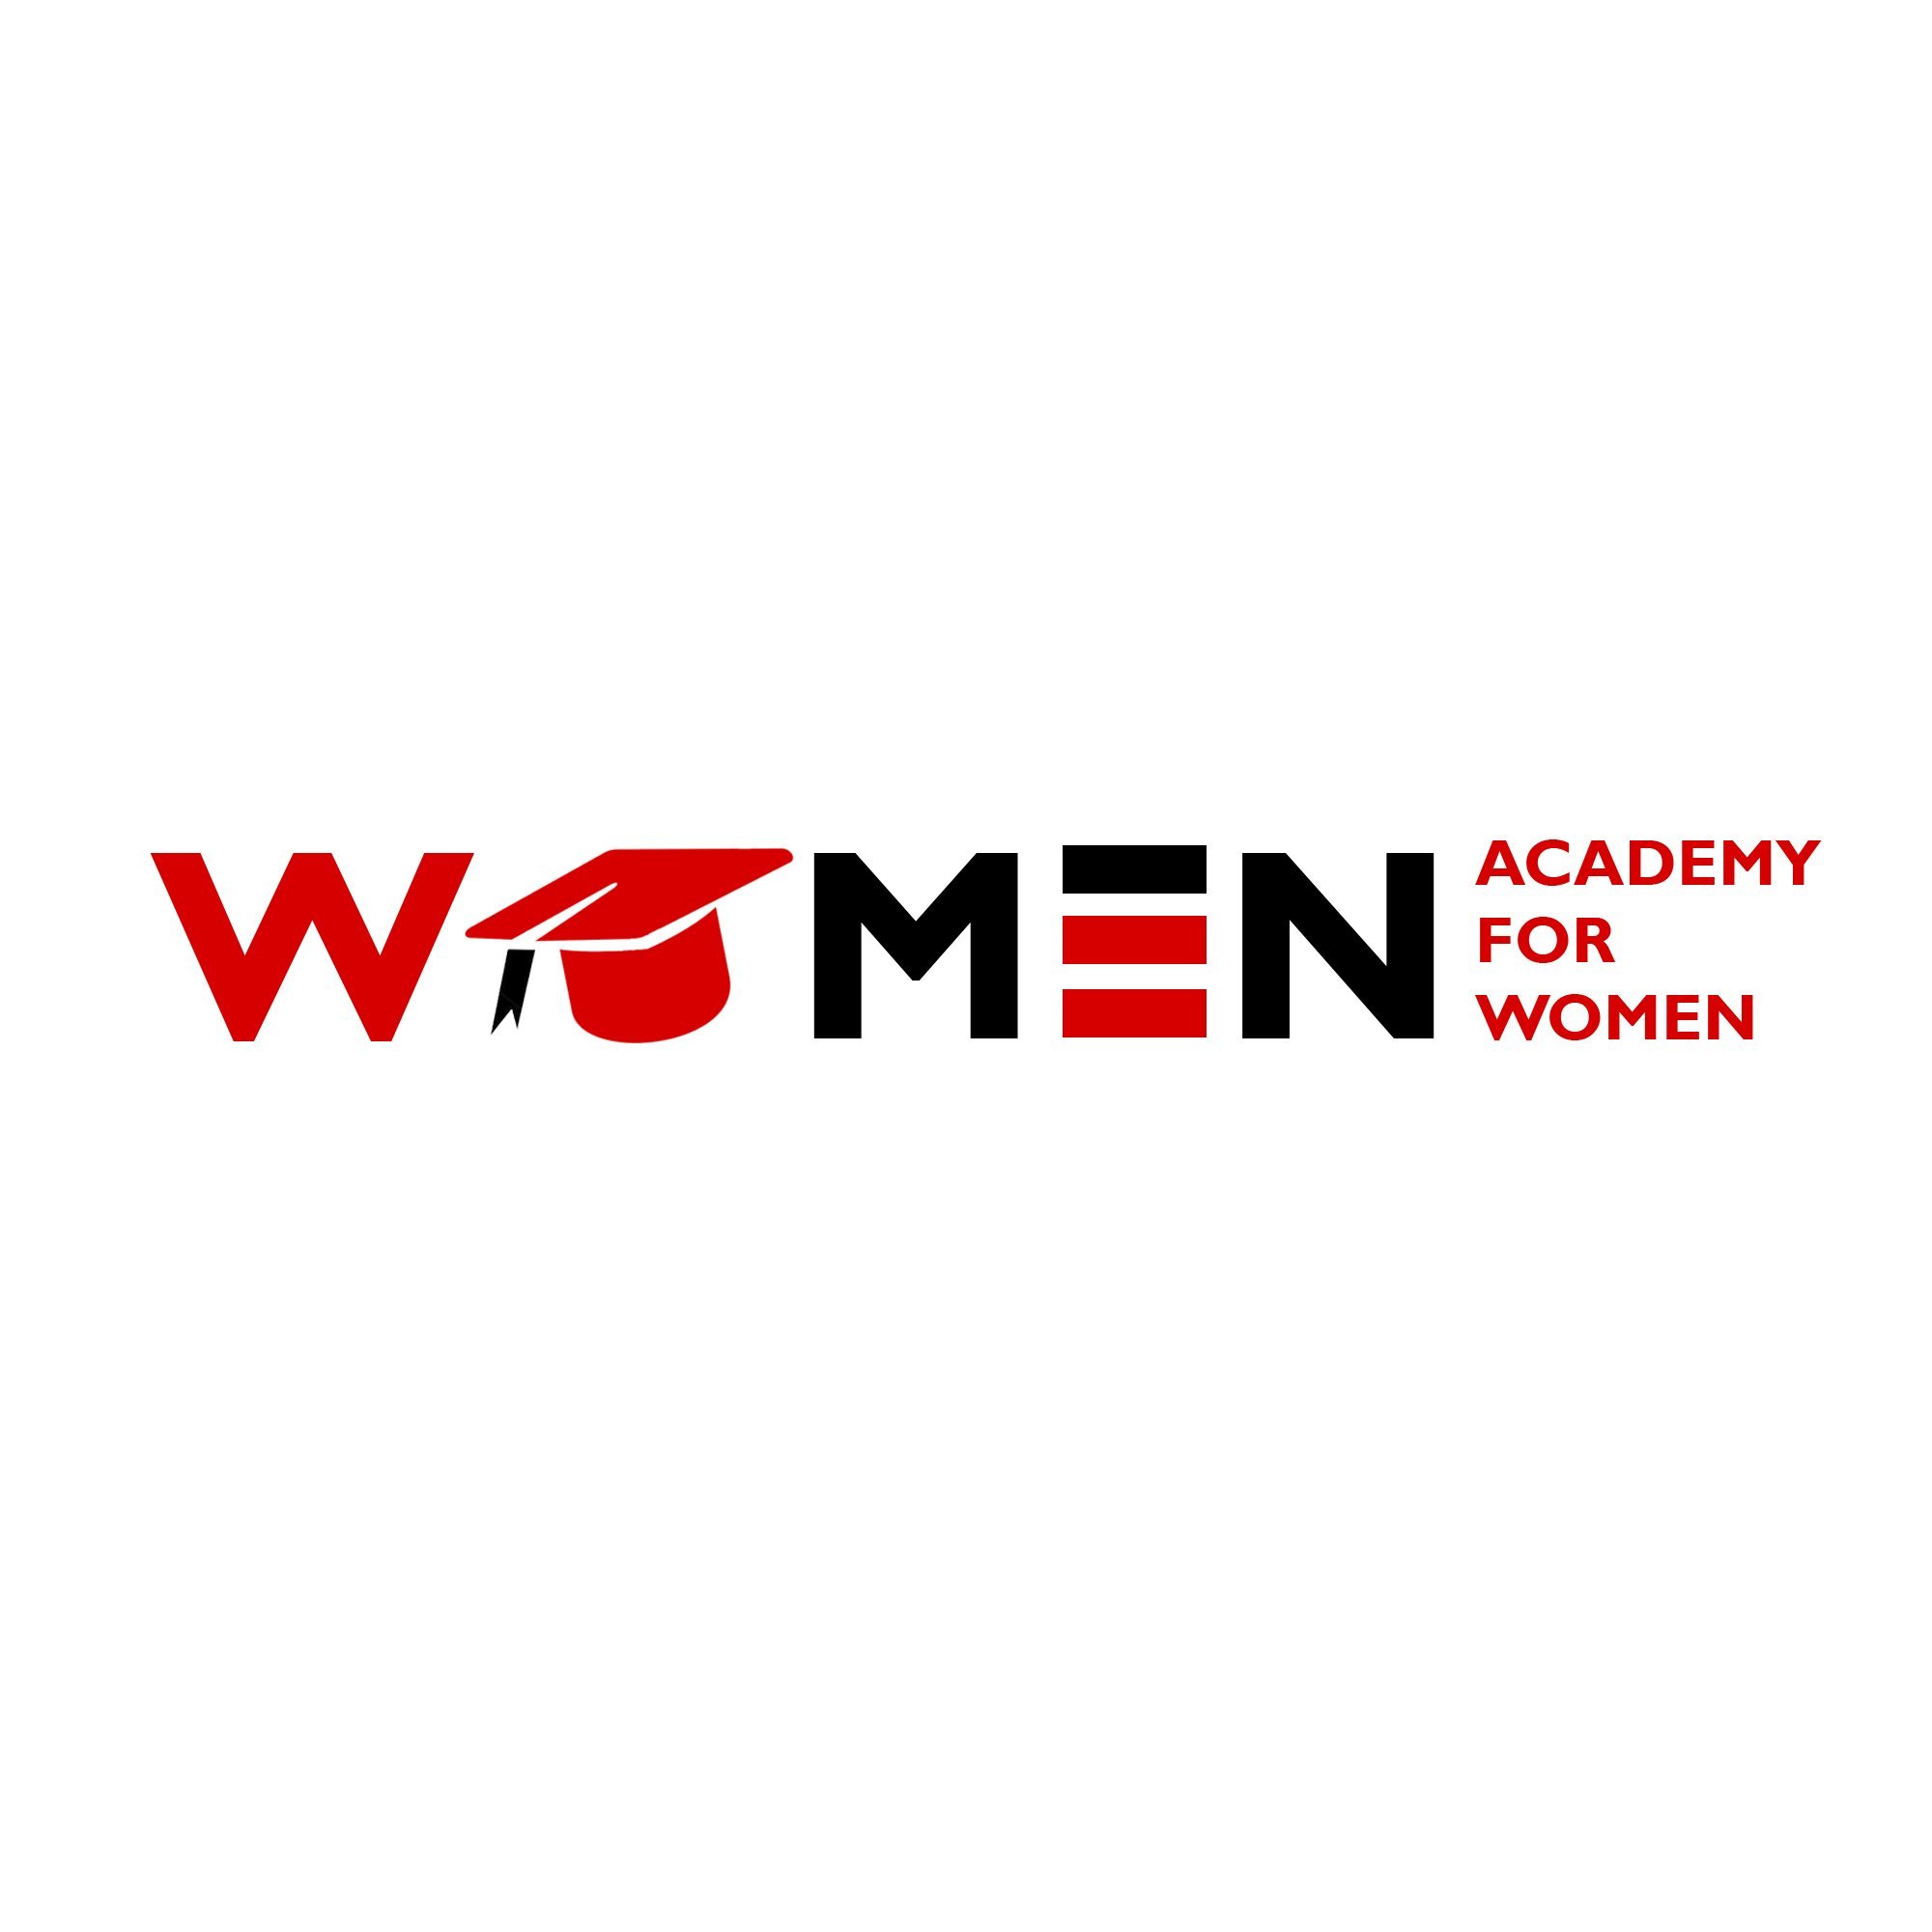 The Academy for Women is a non-governmental organization that works on raising awareness, womens rights and capacity building in all social spheres.